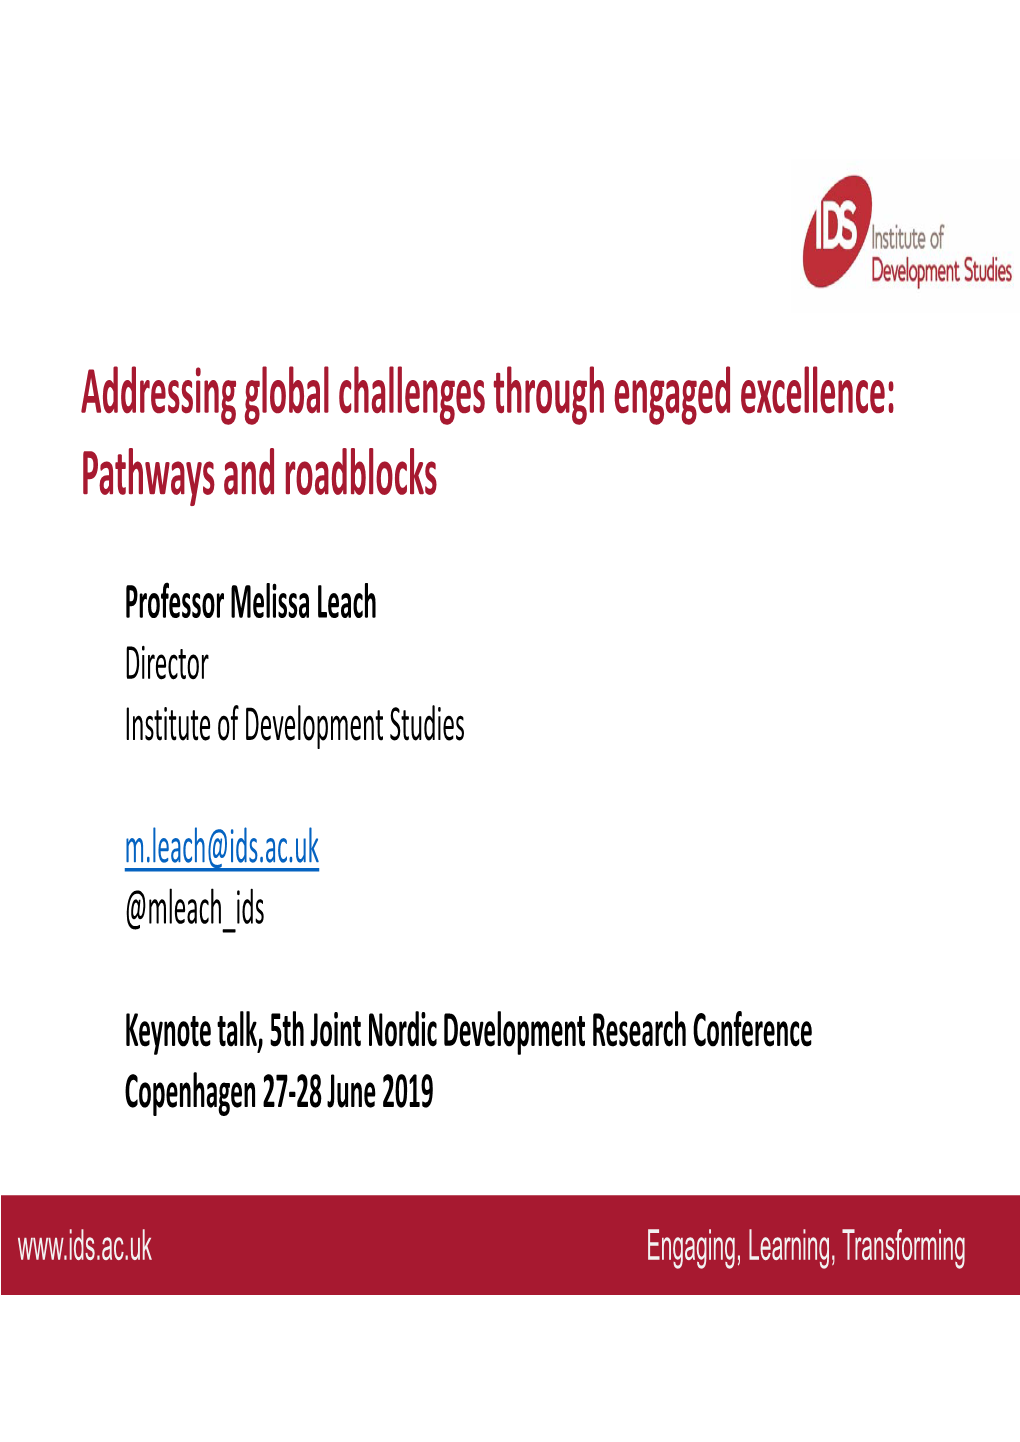 Addressing Global Challenges Through Engaged Excellence: Pathways and Roadblocks